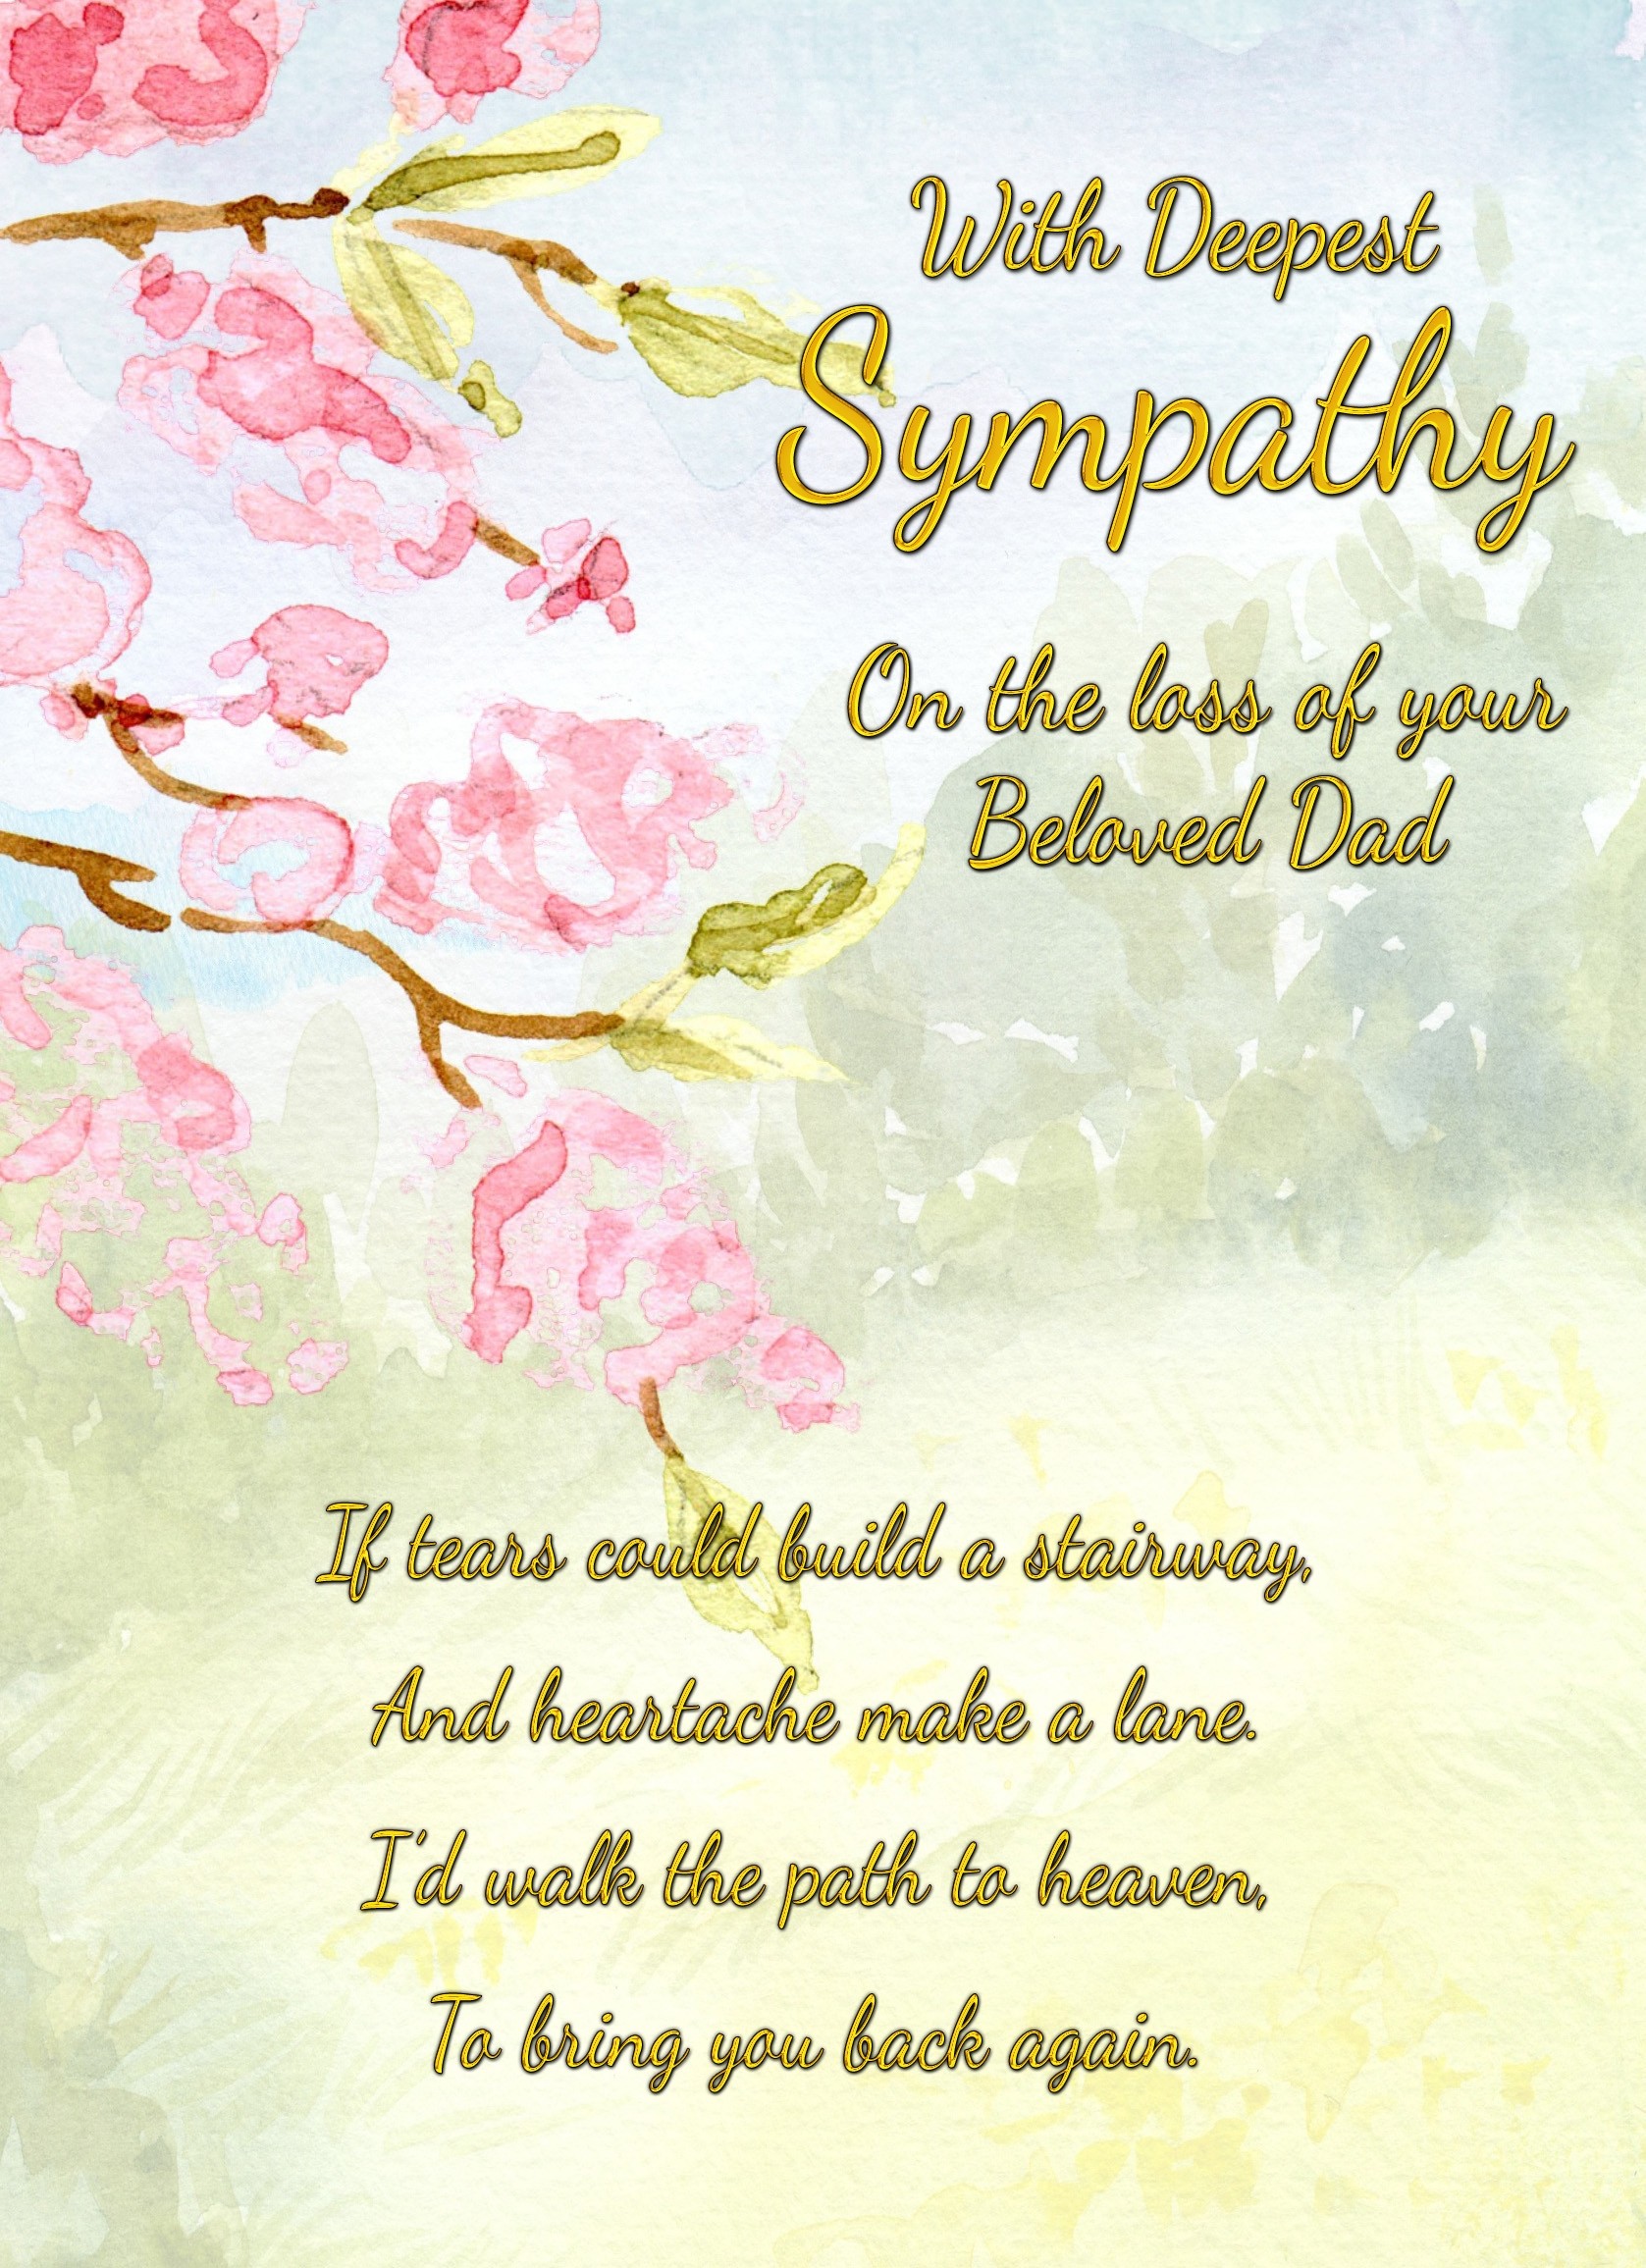 Sympathy Bereavement Card (With Deepest Sympathy, Beloved Dad)